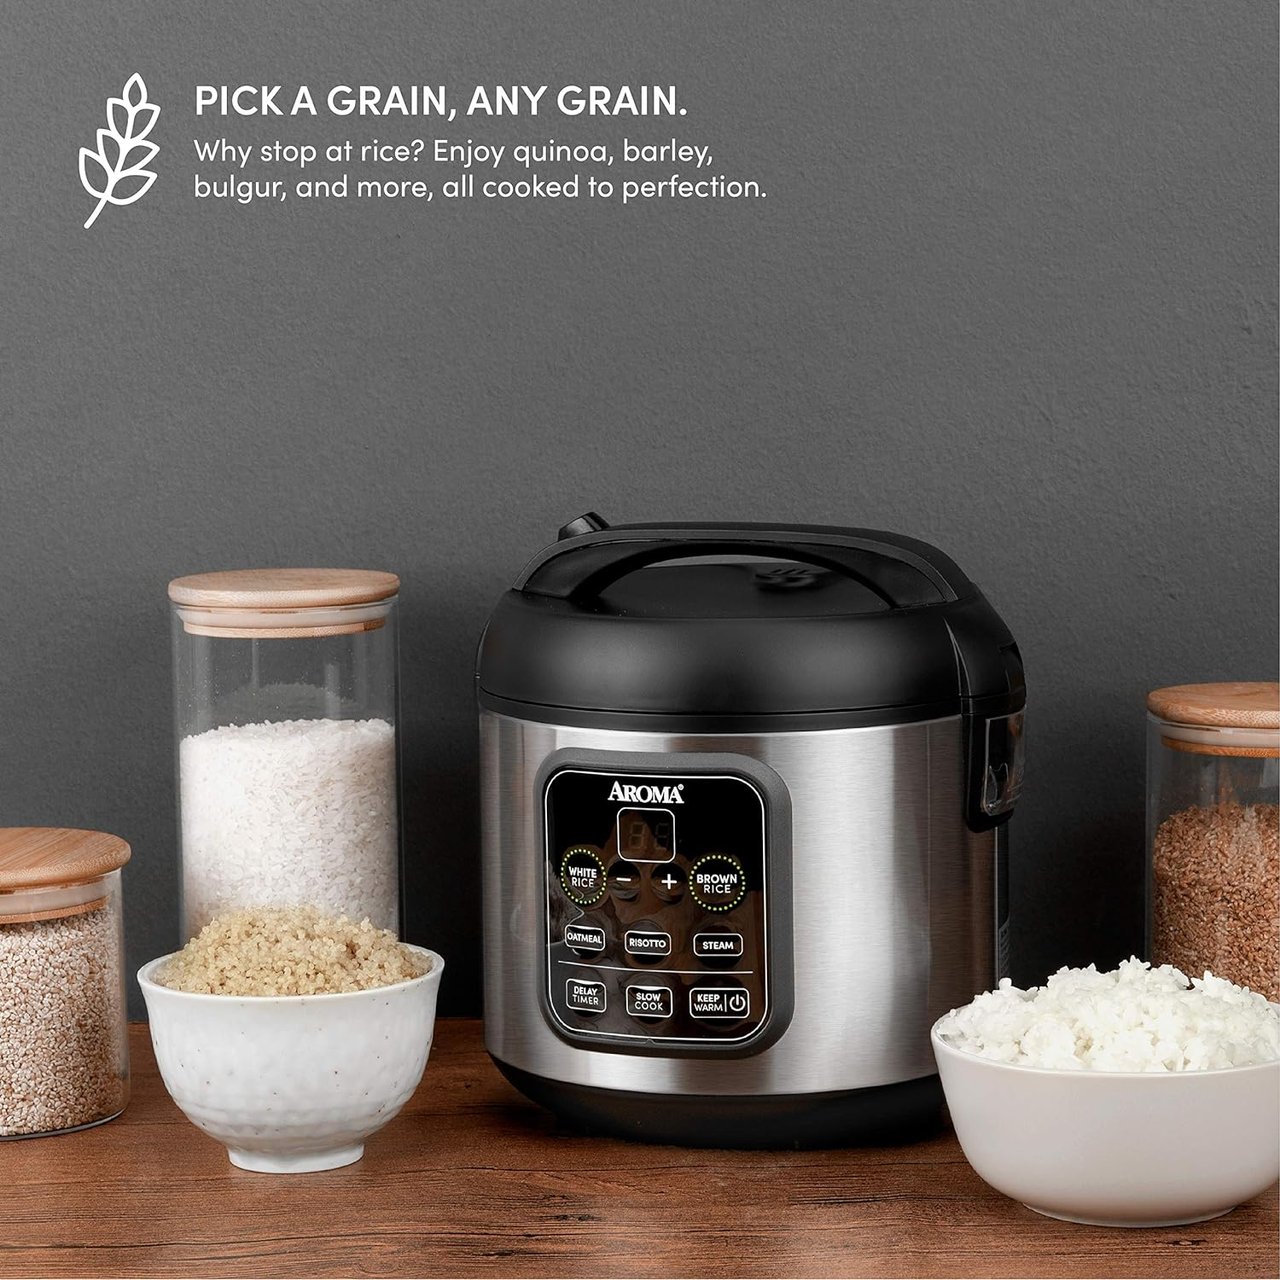 5 Aroma Housewares ARC-994SB Rice & Grain Cooker Slow Cook, Steam, Oatmeal, Risotto, 8-cup cooked/4-cup uncooked/2Qt, Stainless Steel